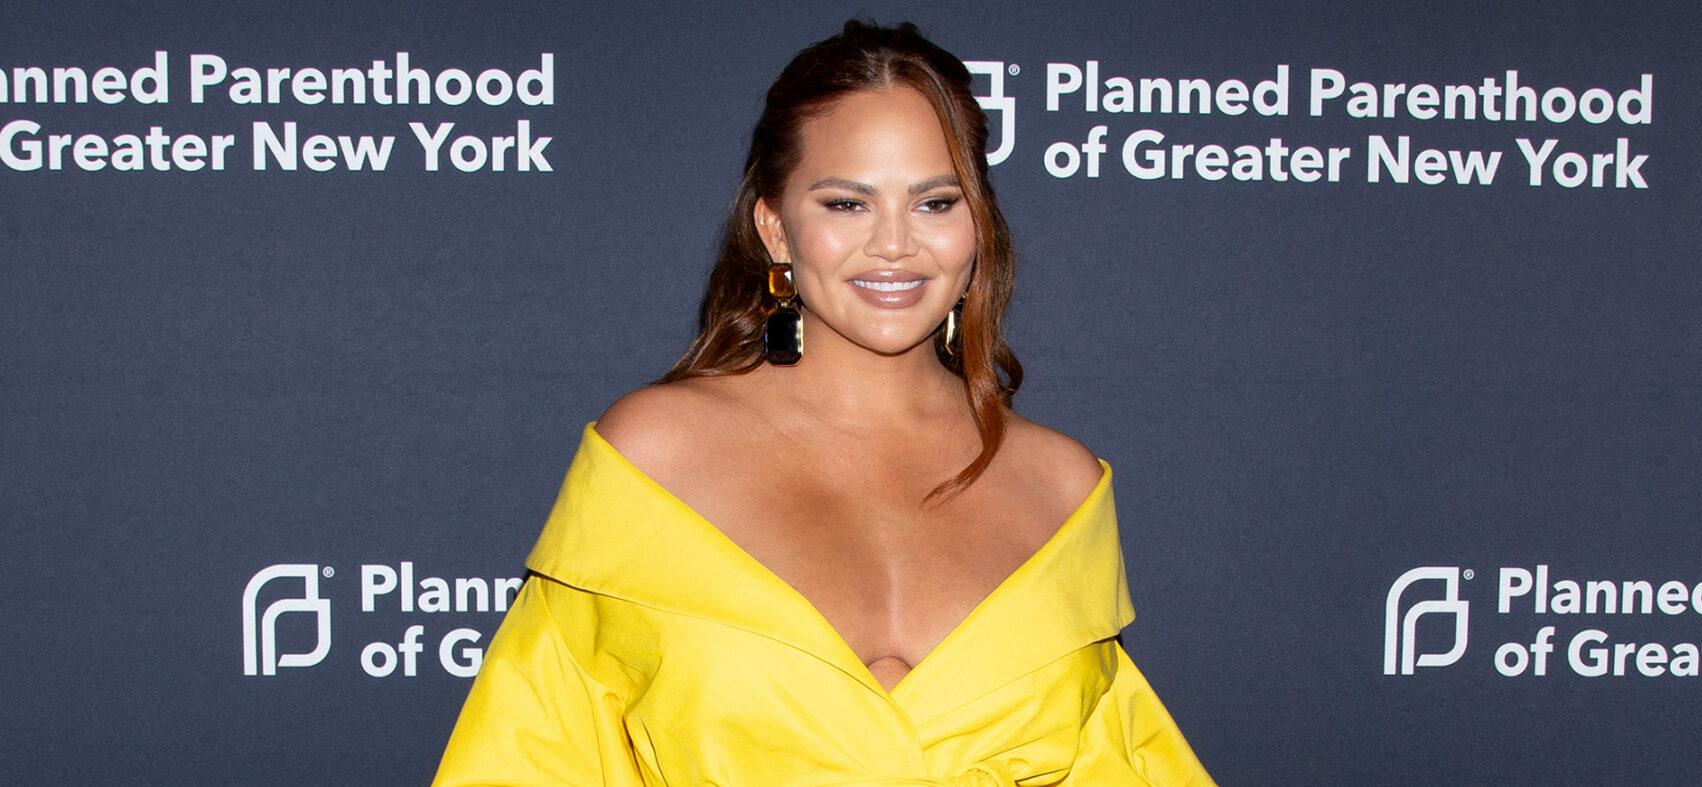 Chrissy Teigen at the Planned Parenthood 